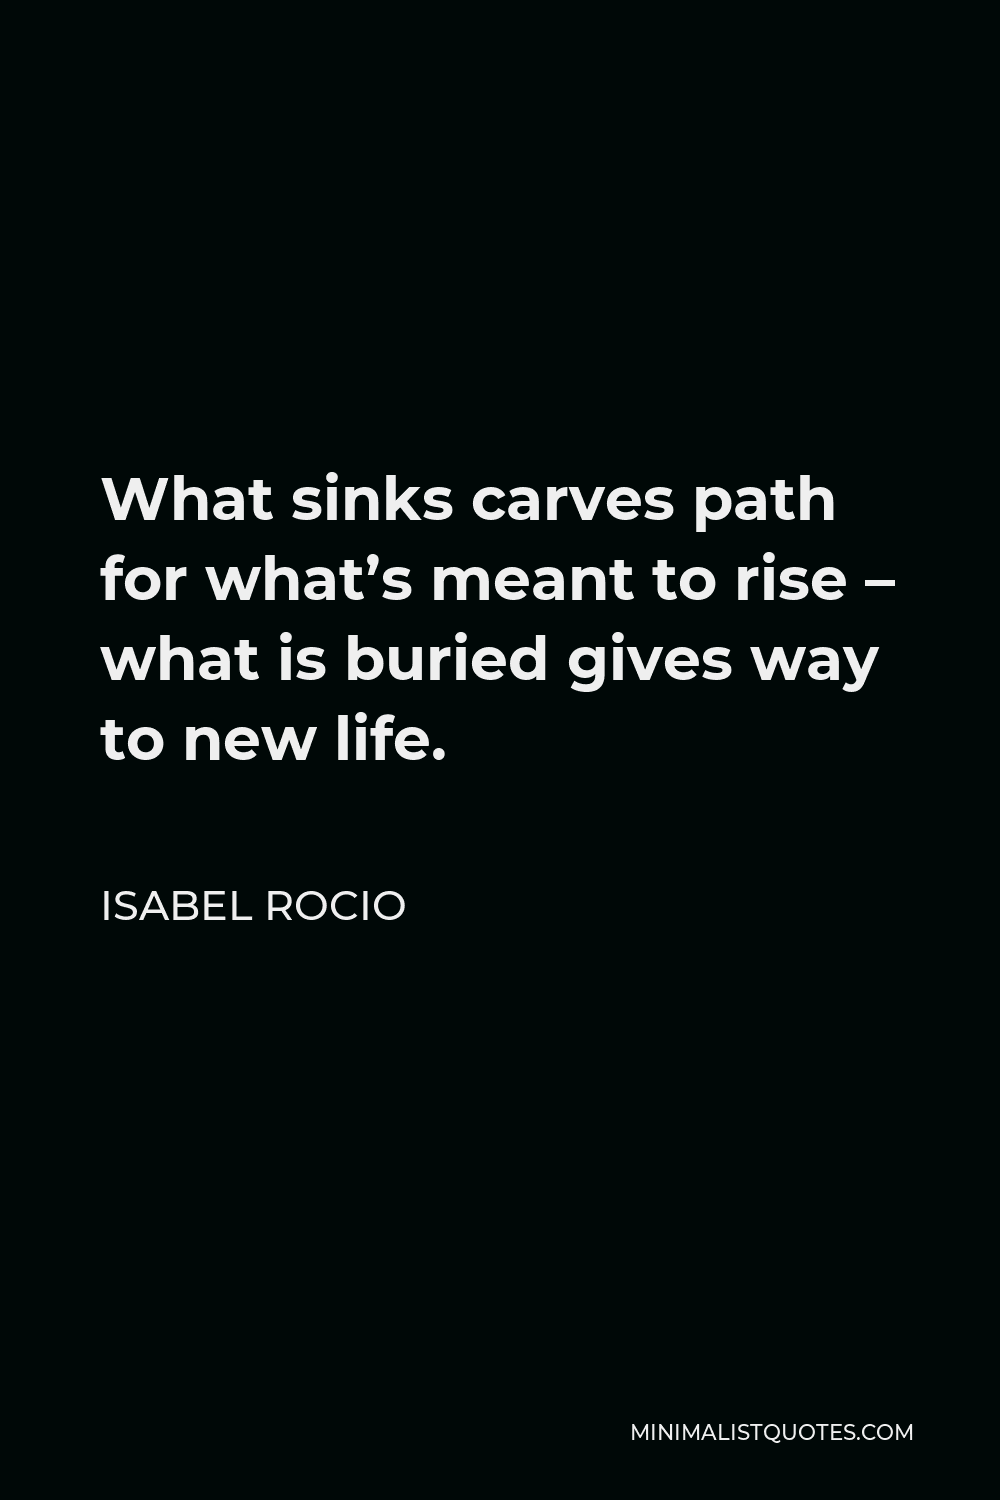 Isabel Rocio Quote - What sinks carves path for what’s meant to rise – what is buried gives way to new life.